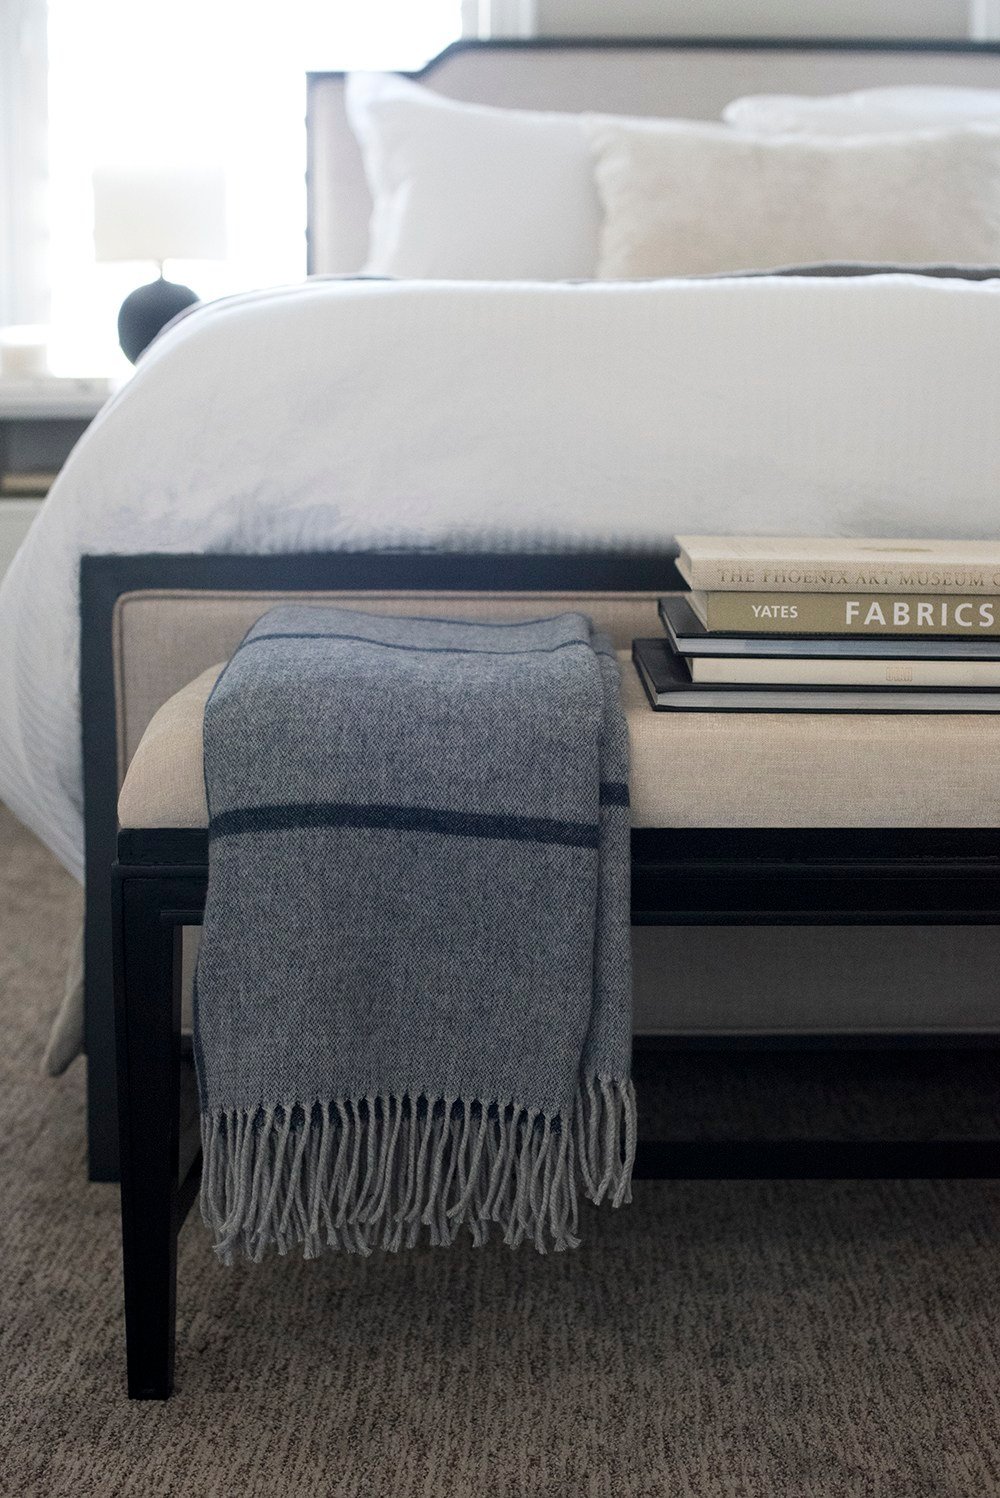 10 Posts to Inspire That “Cozy” Feeling this Winter - roomfortuesday.com